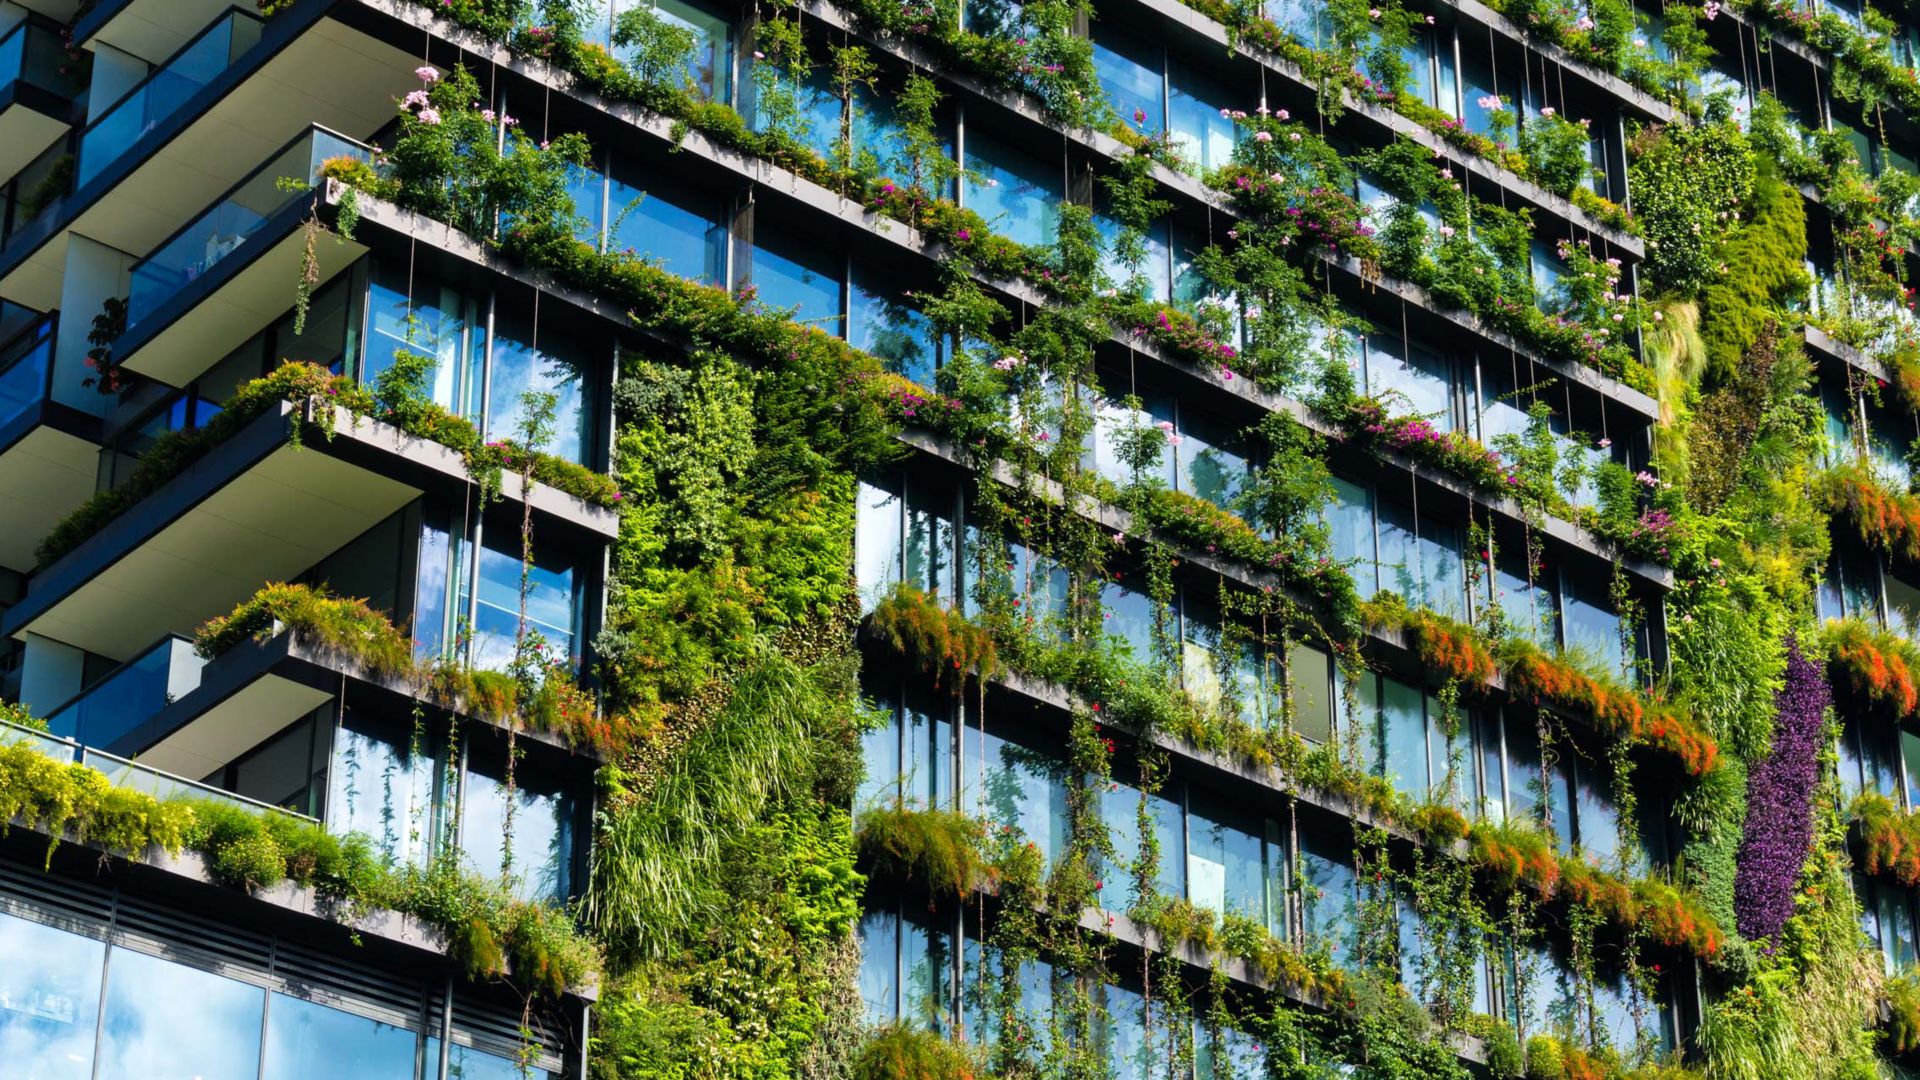 Green skyscraper building with plants growing on the facade. Ecology and green living in city, urban environment concept. Park in the sky, One central park building, Sydney, Australia